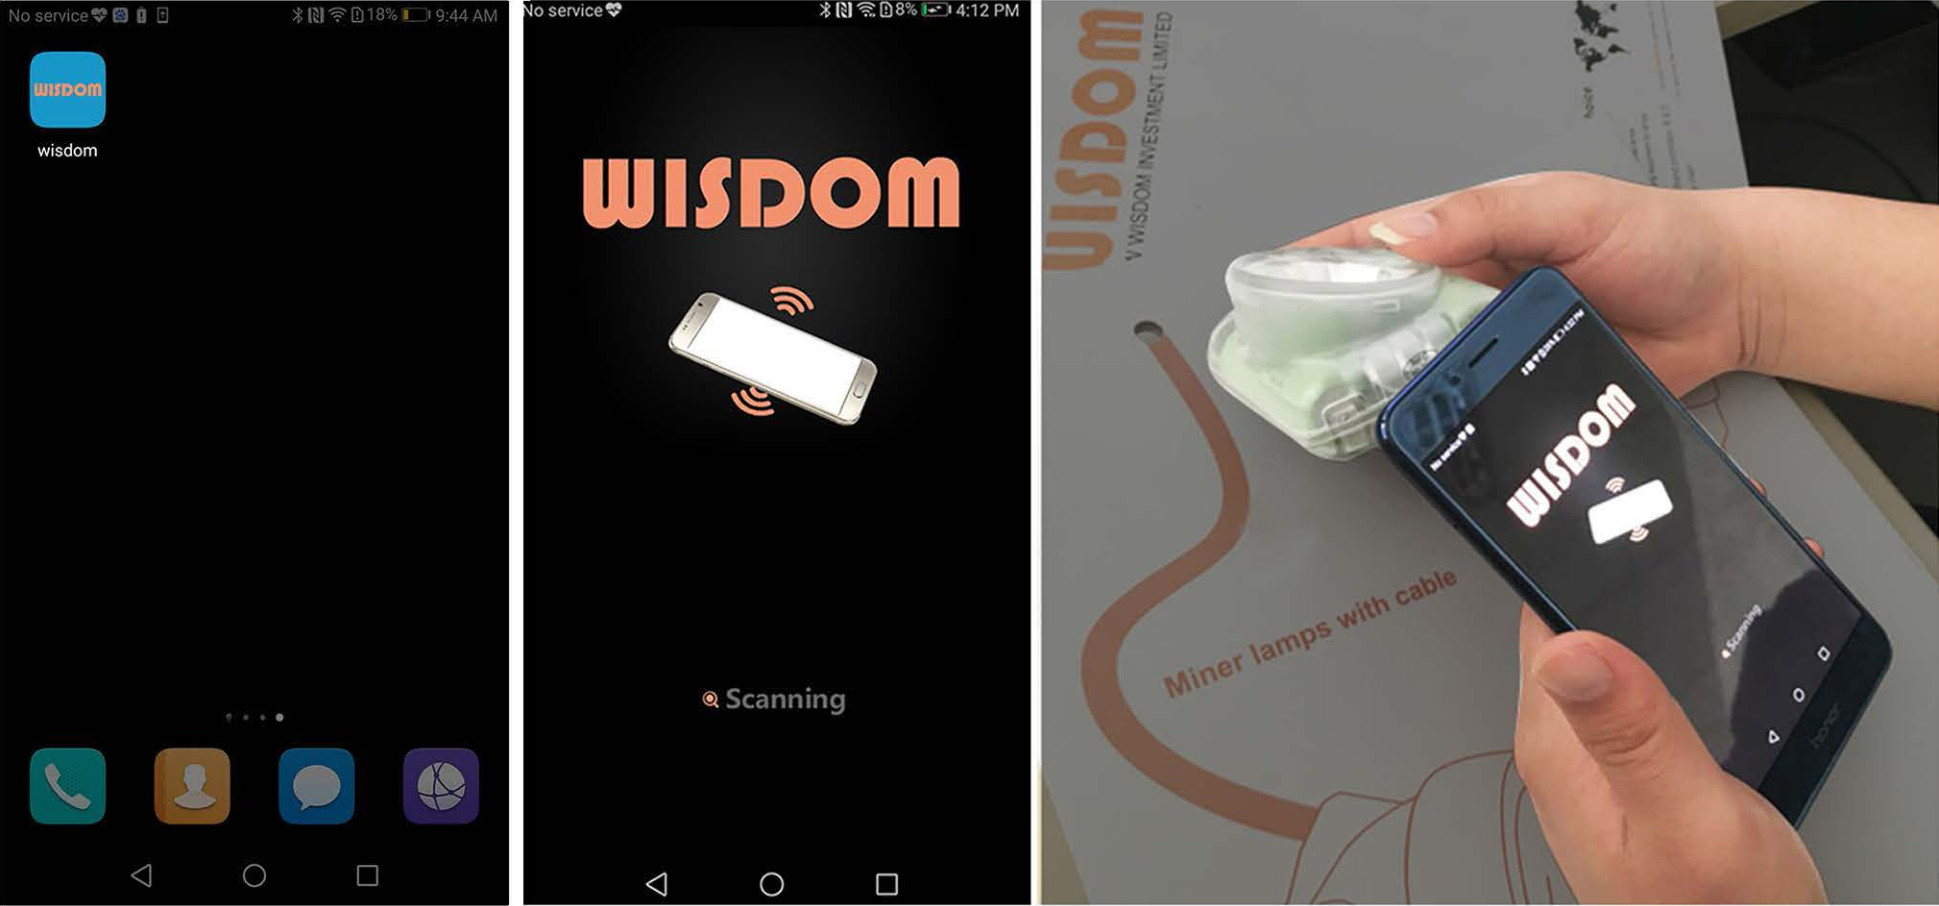 use smart phone NFC to scan the WISDOM miner lamp